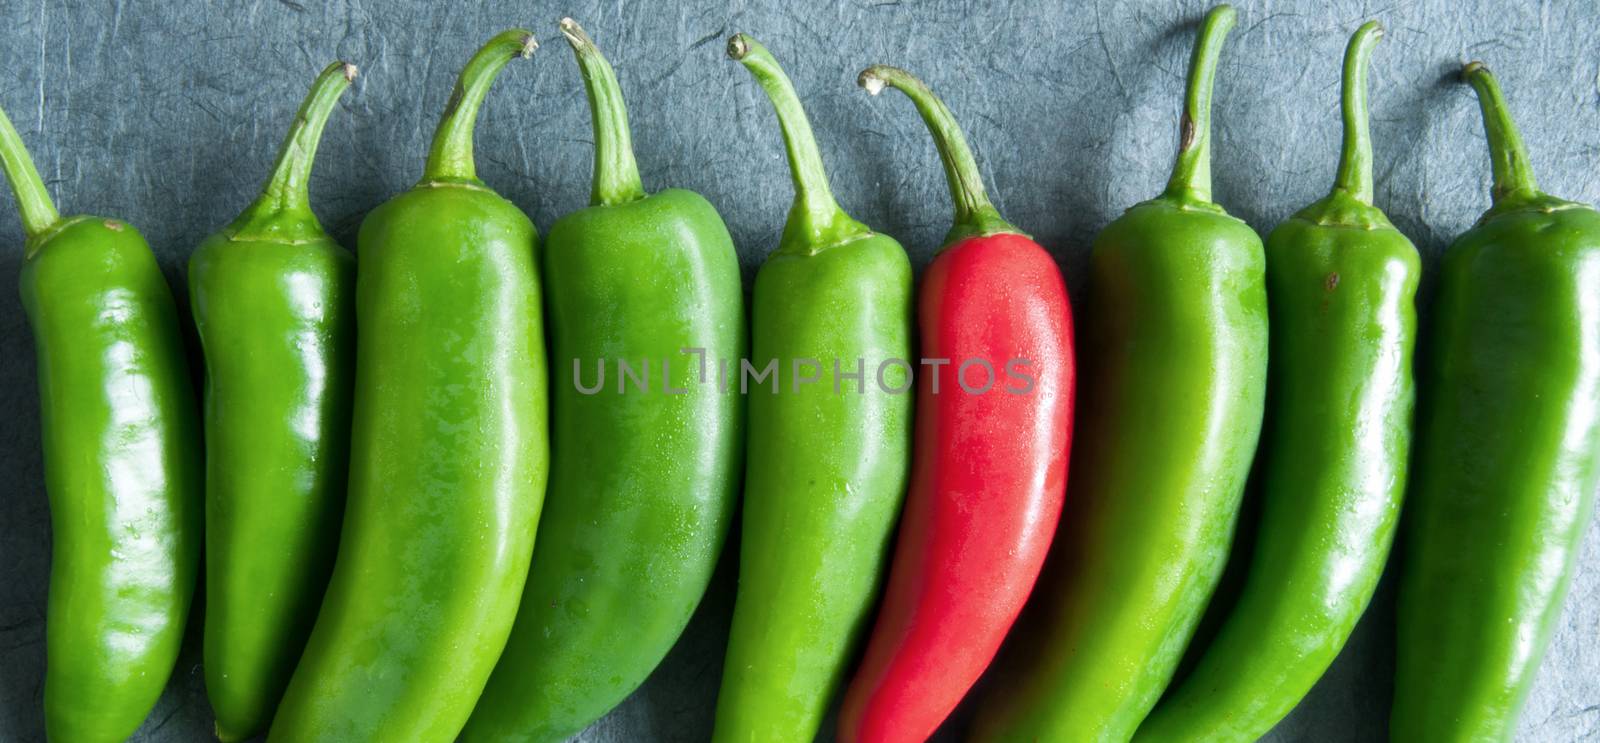 Chilli peppers by unikpix